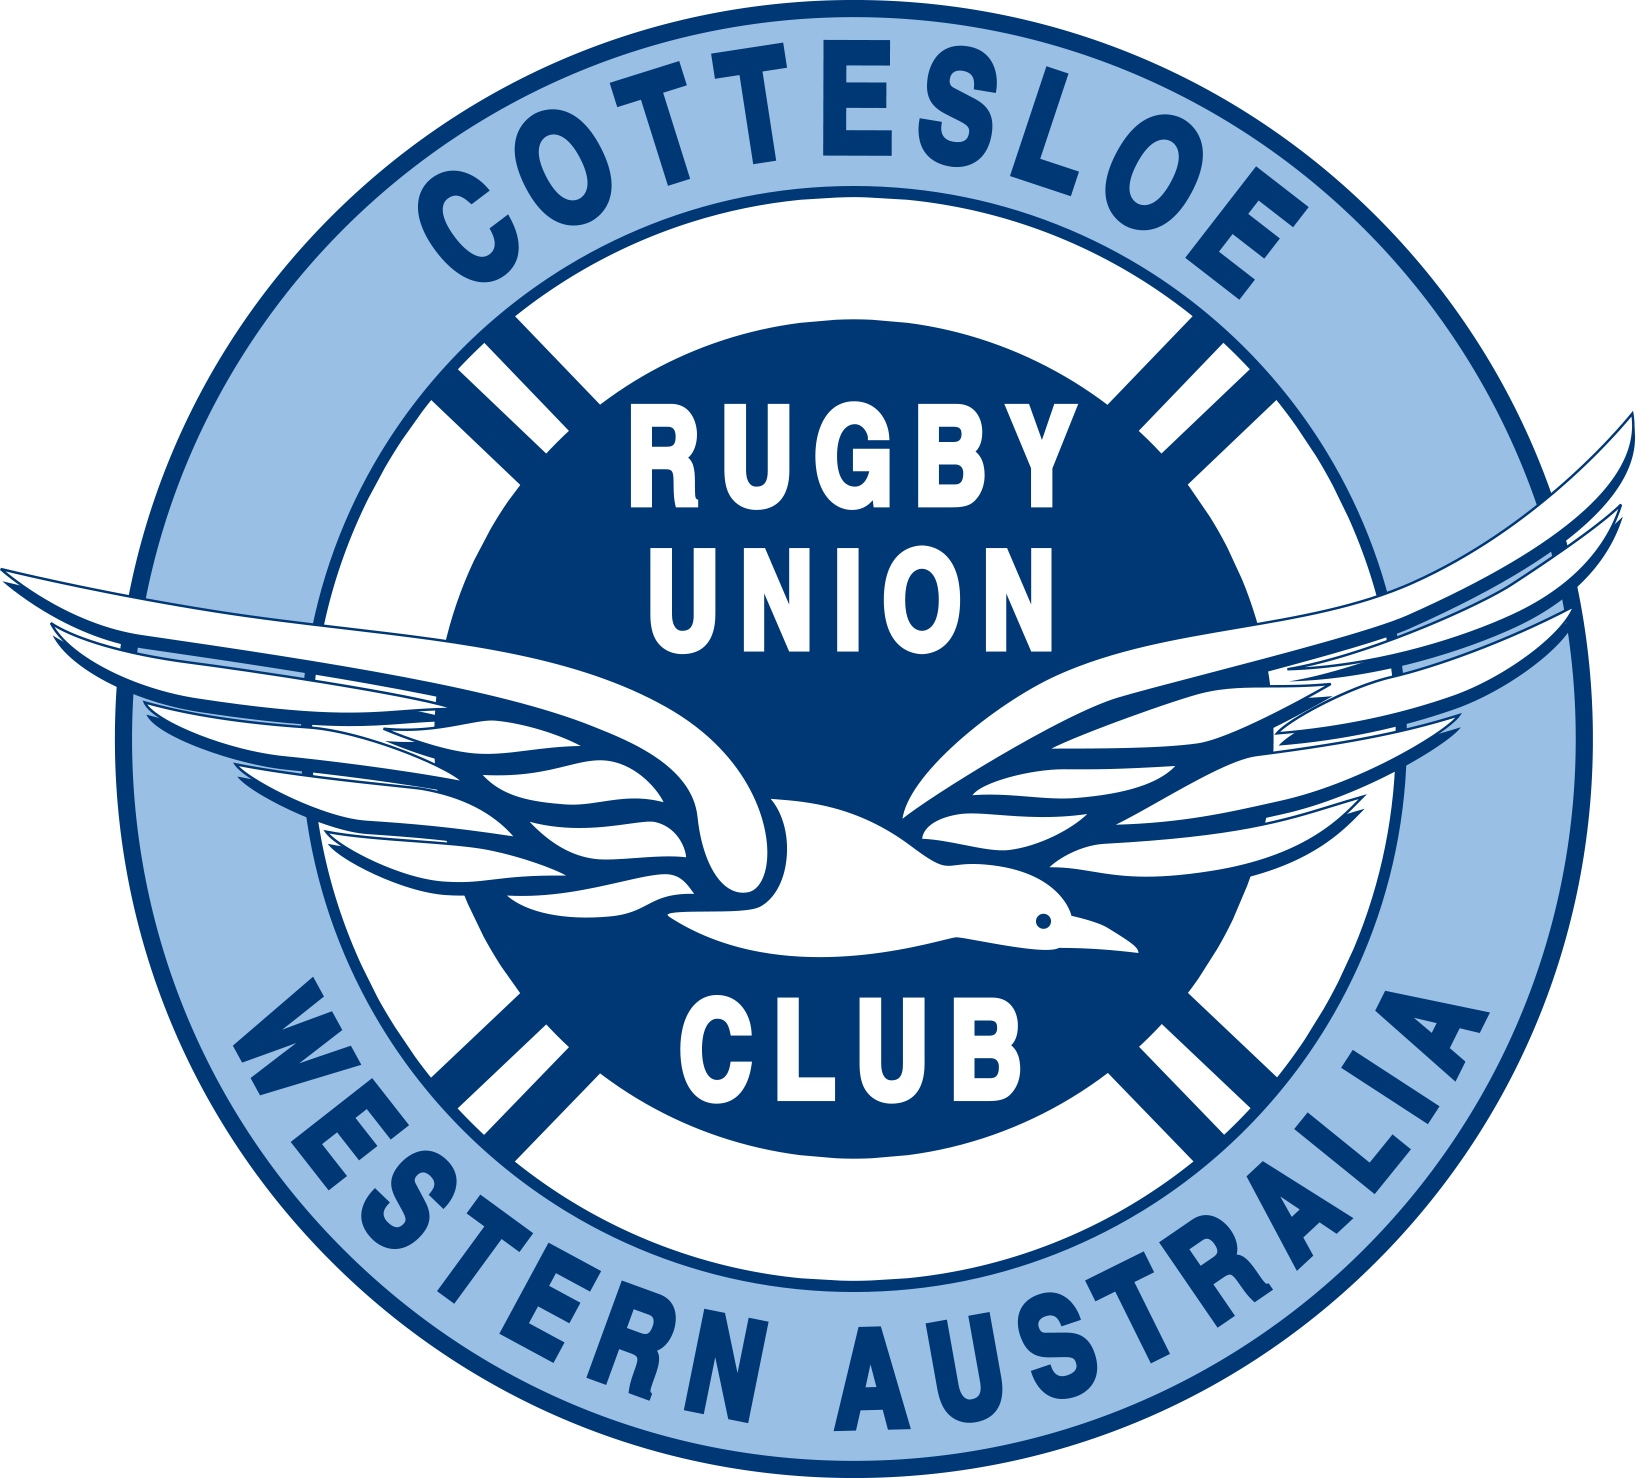 Cottesloe Rugby Union Football Club